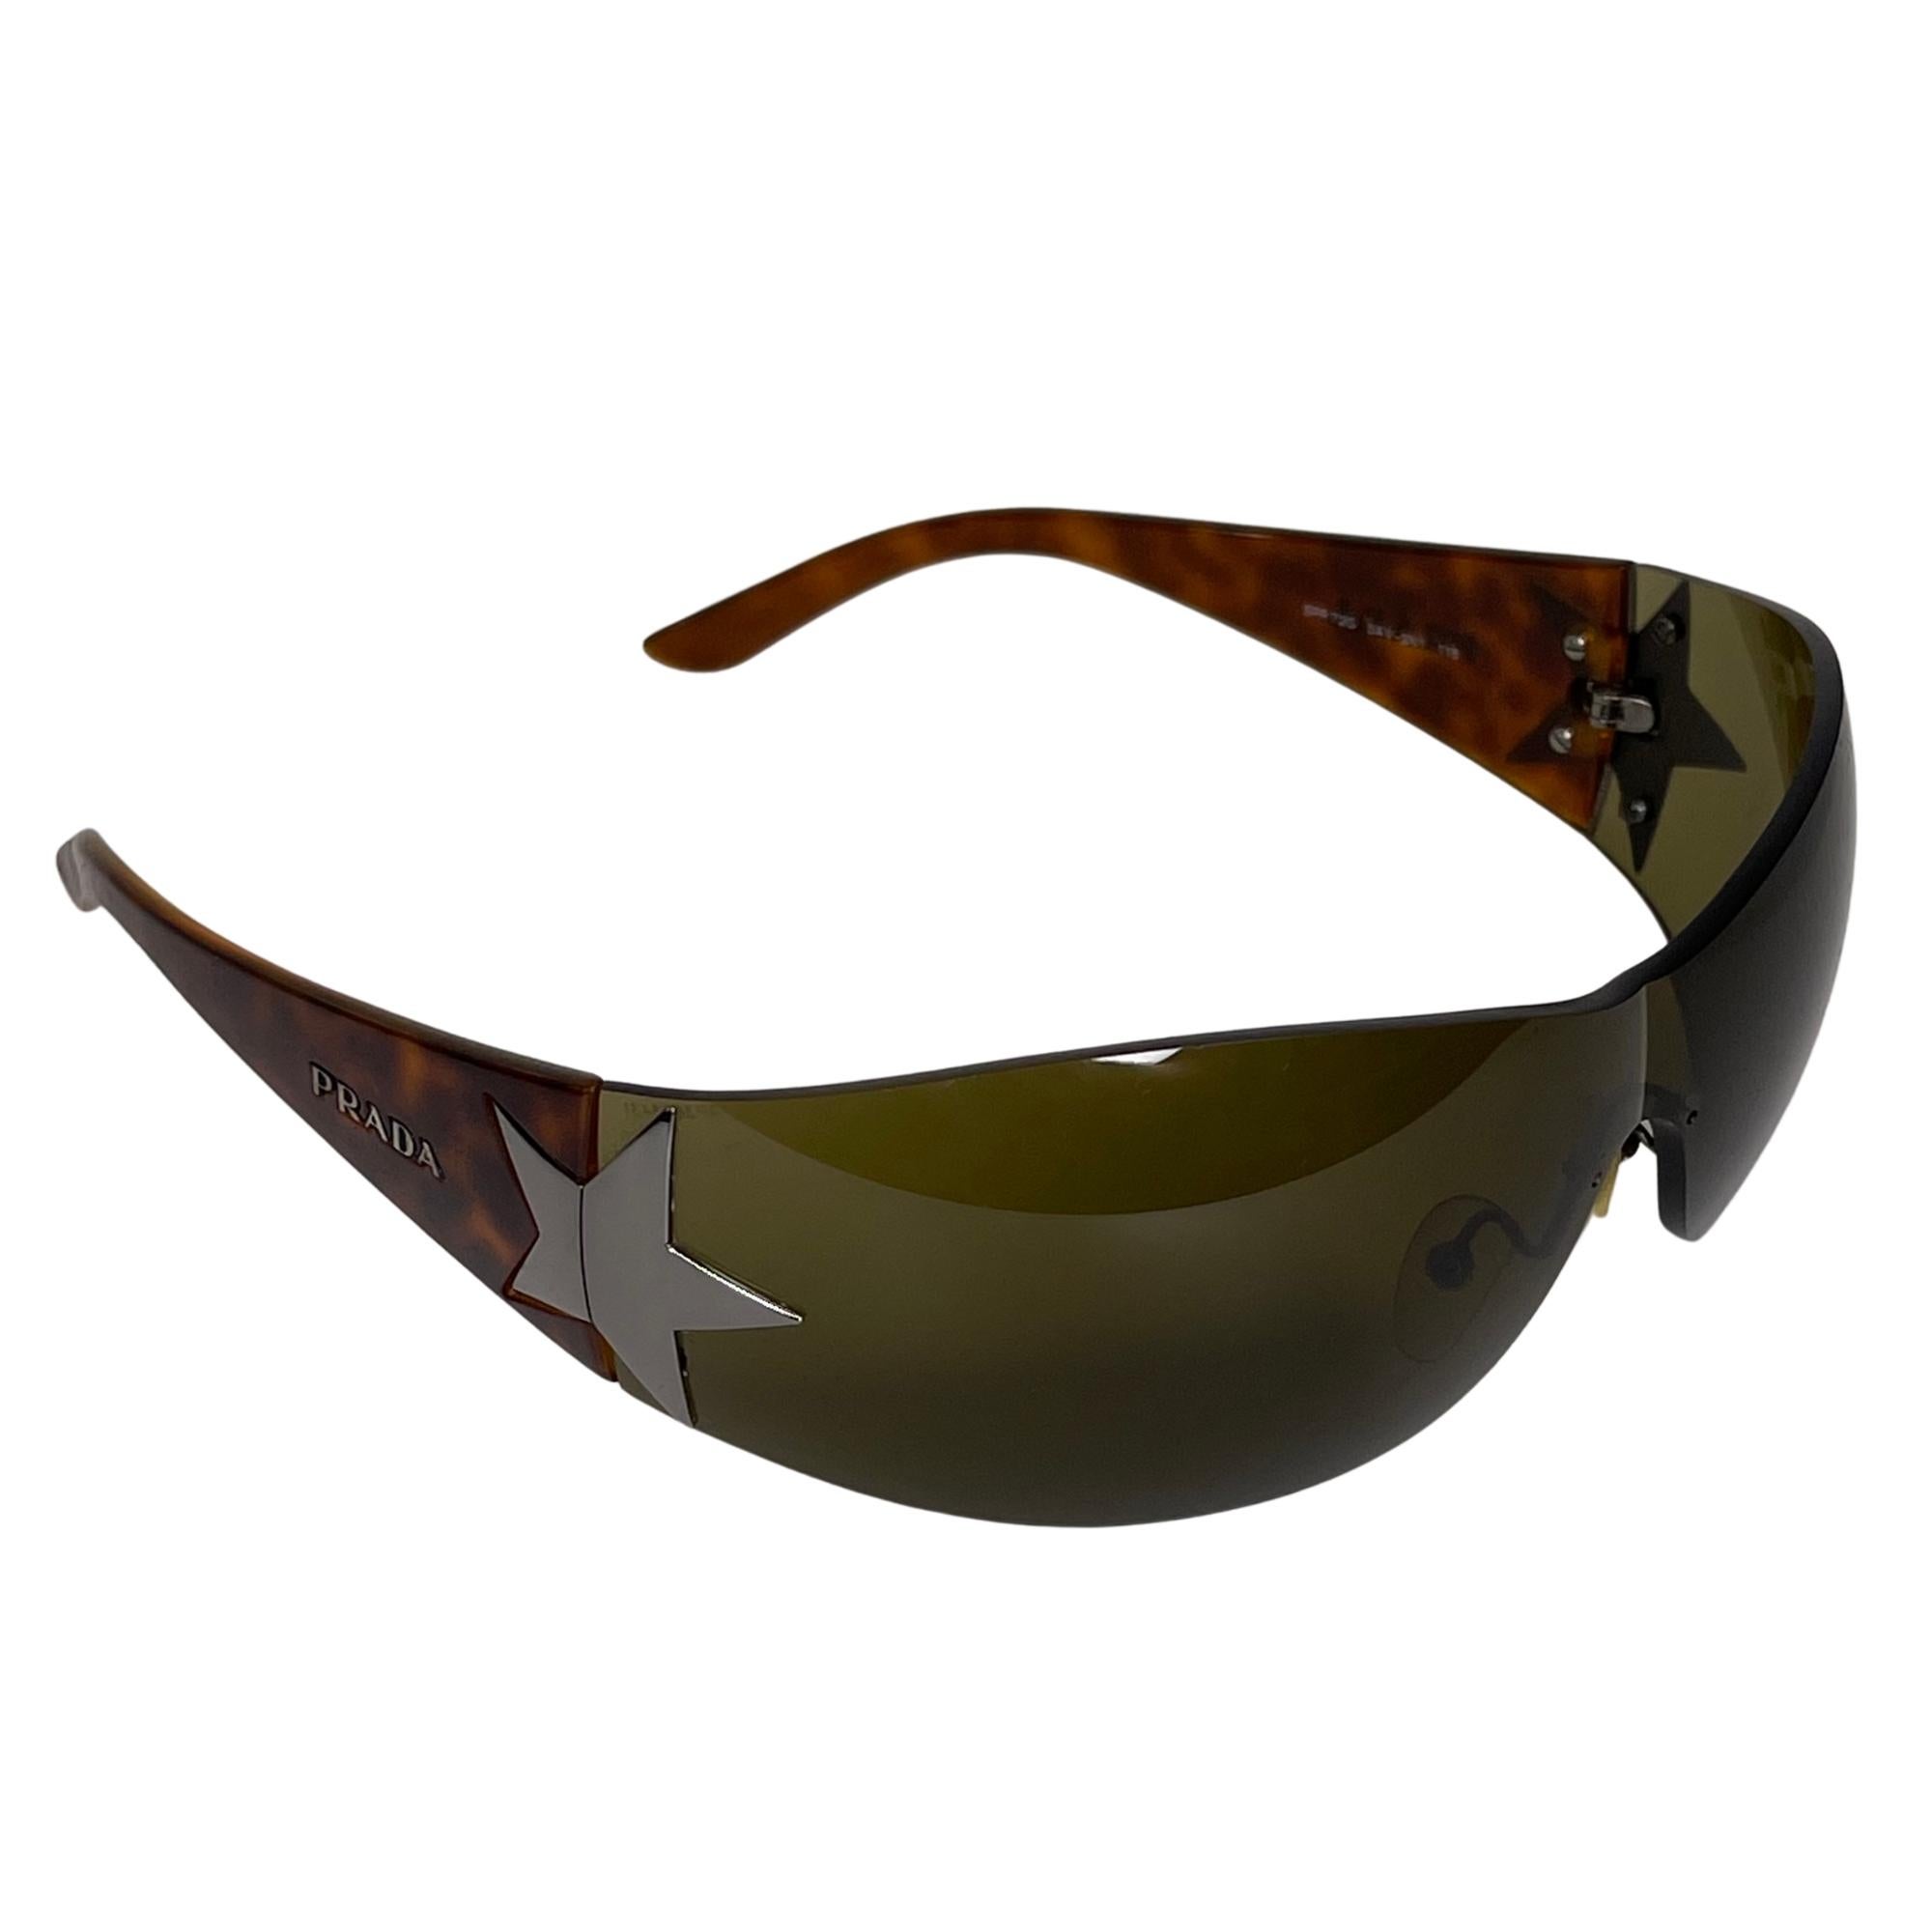 COLOR: Black/Brown
ITEM CODE: SPR 72G 5AV-3N1
SIZE STAMP: 115
FRAME MATERIAL: Acetate (plastic)

~MEASURES:
Arms: 115mm

COMES WITH: Sunglass case
CONDITION: Good- frame & lens show faint scratches.

Made in Italy
100% UV Protection